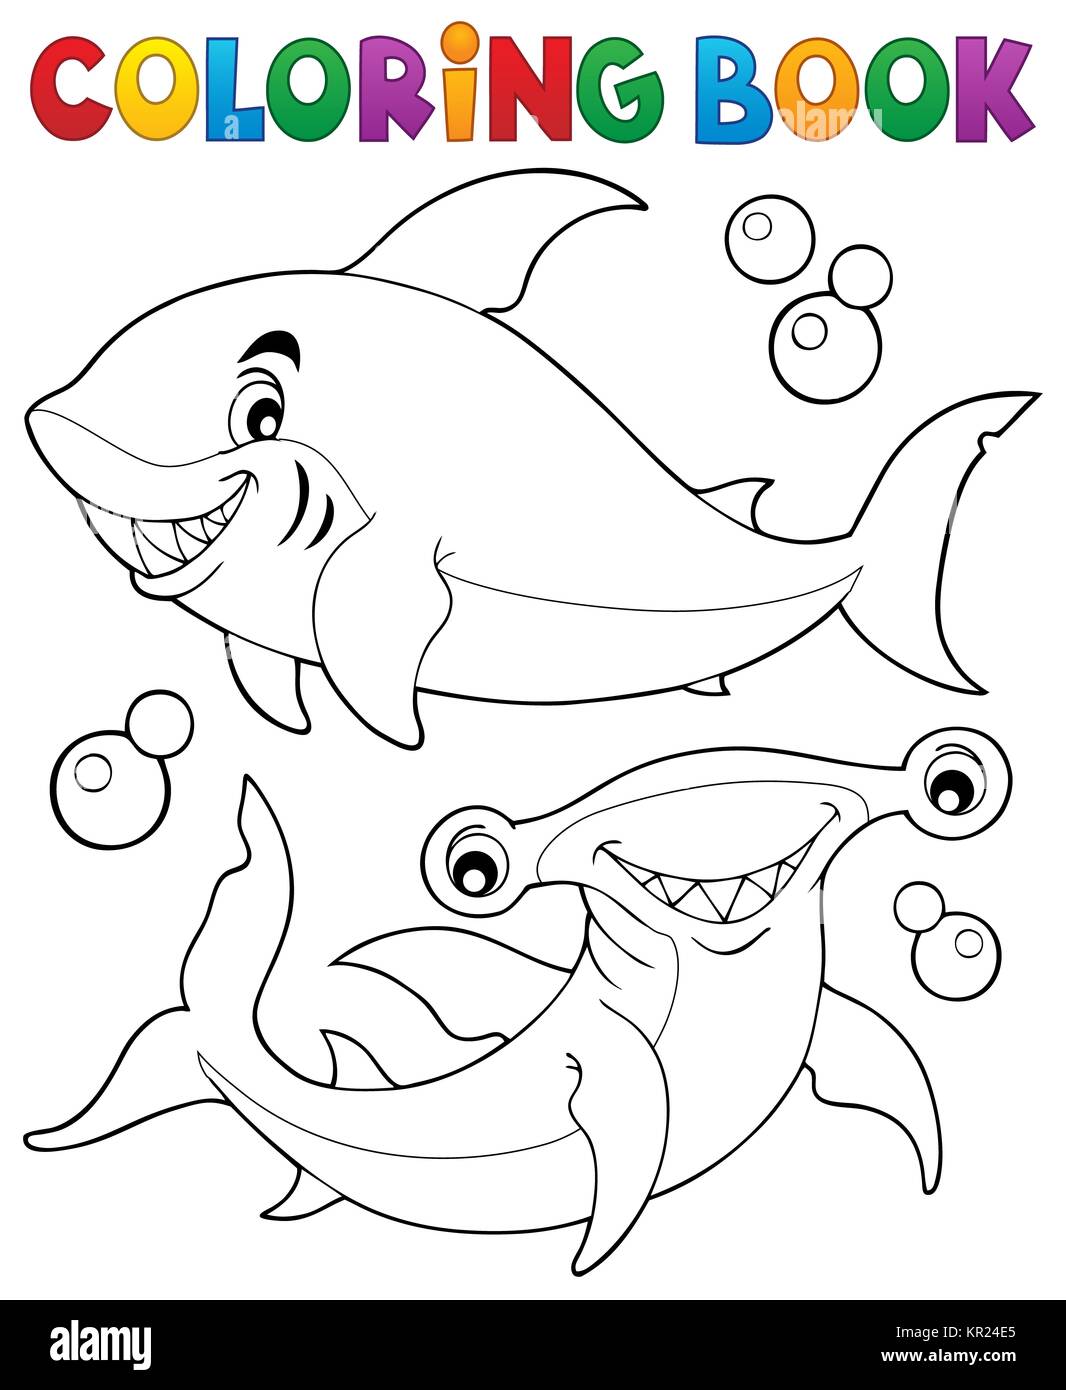 Coloring book with two sharks Stock Photo